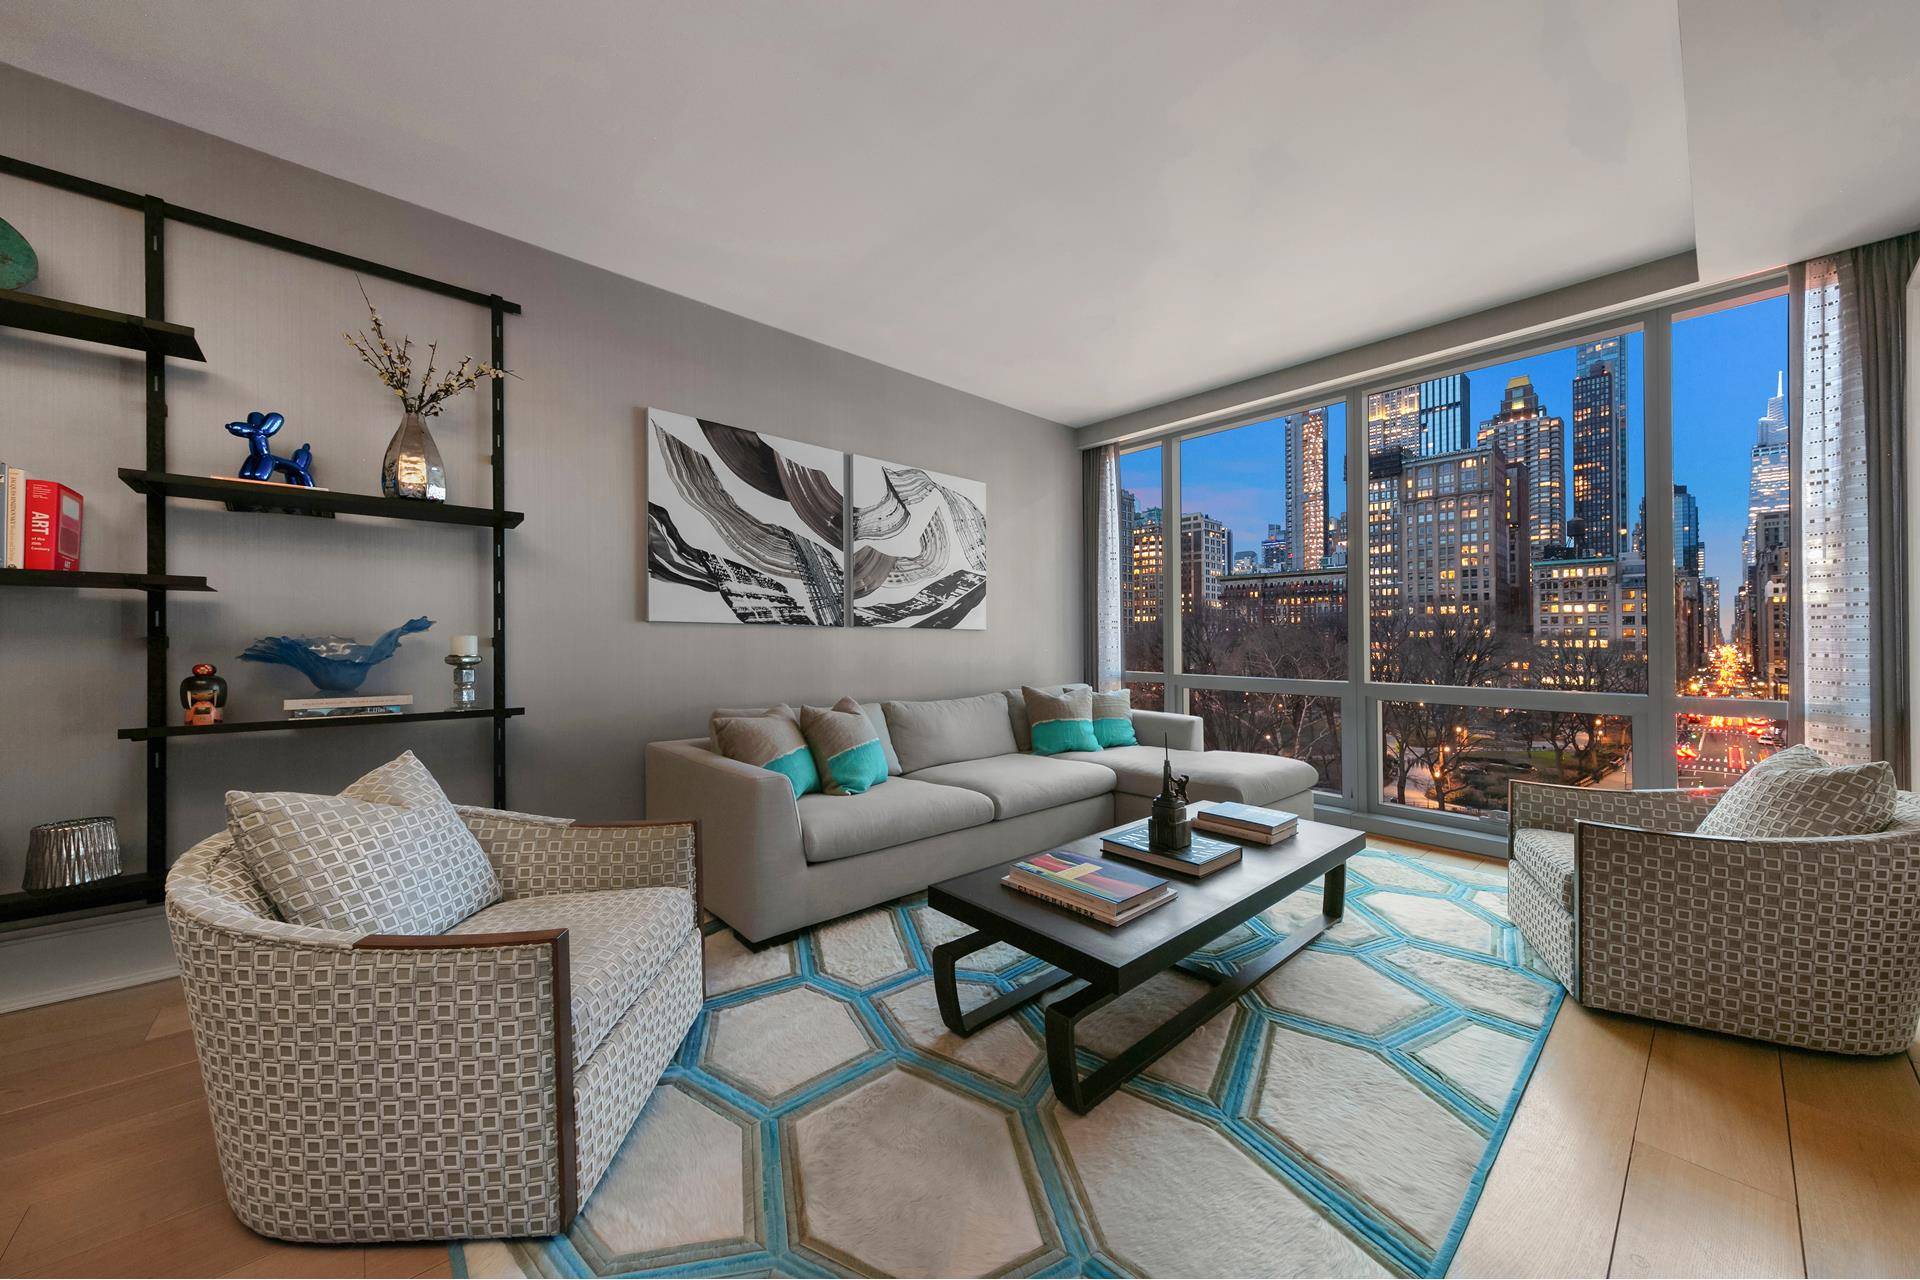 Welcome to Residence 7D at One Madison A rarely available 2 bedroom, 2 bathroom sanctuary offering protected views over Madison Square Park and iconic Madison Avenue.